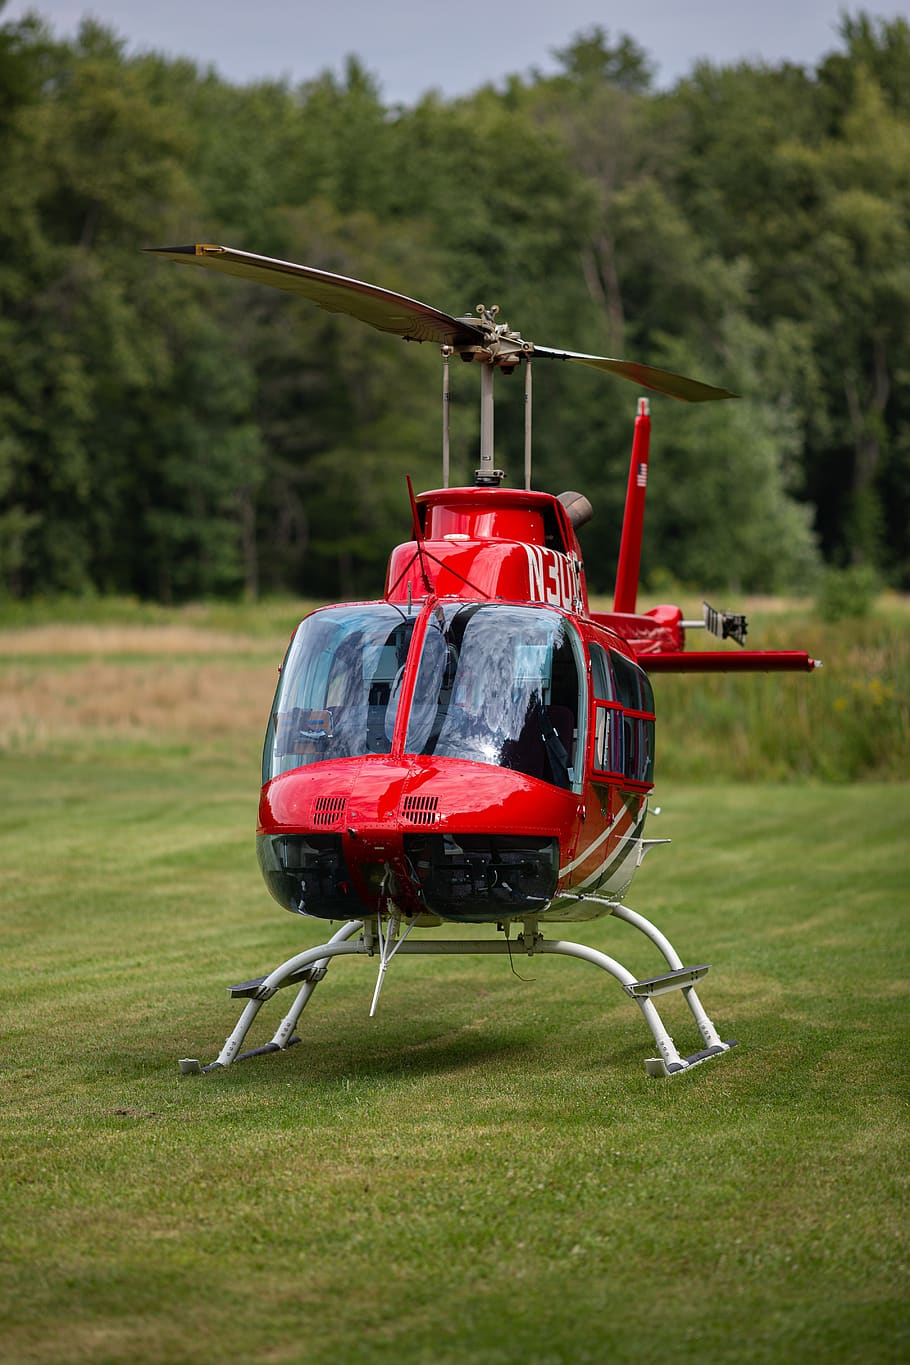 helicopter, red, planes, show, plant, nature, day, grass, mode of transportation, land